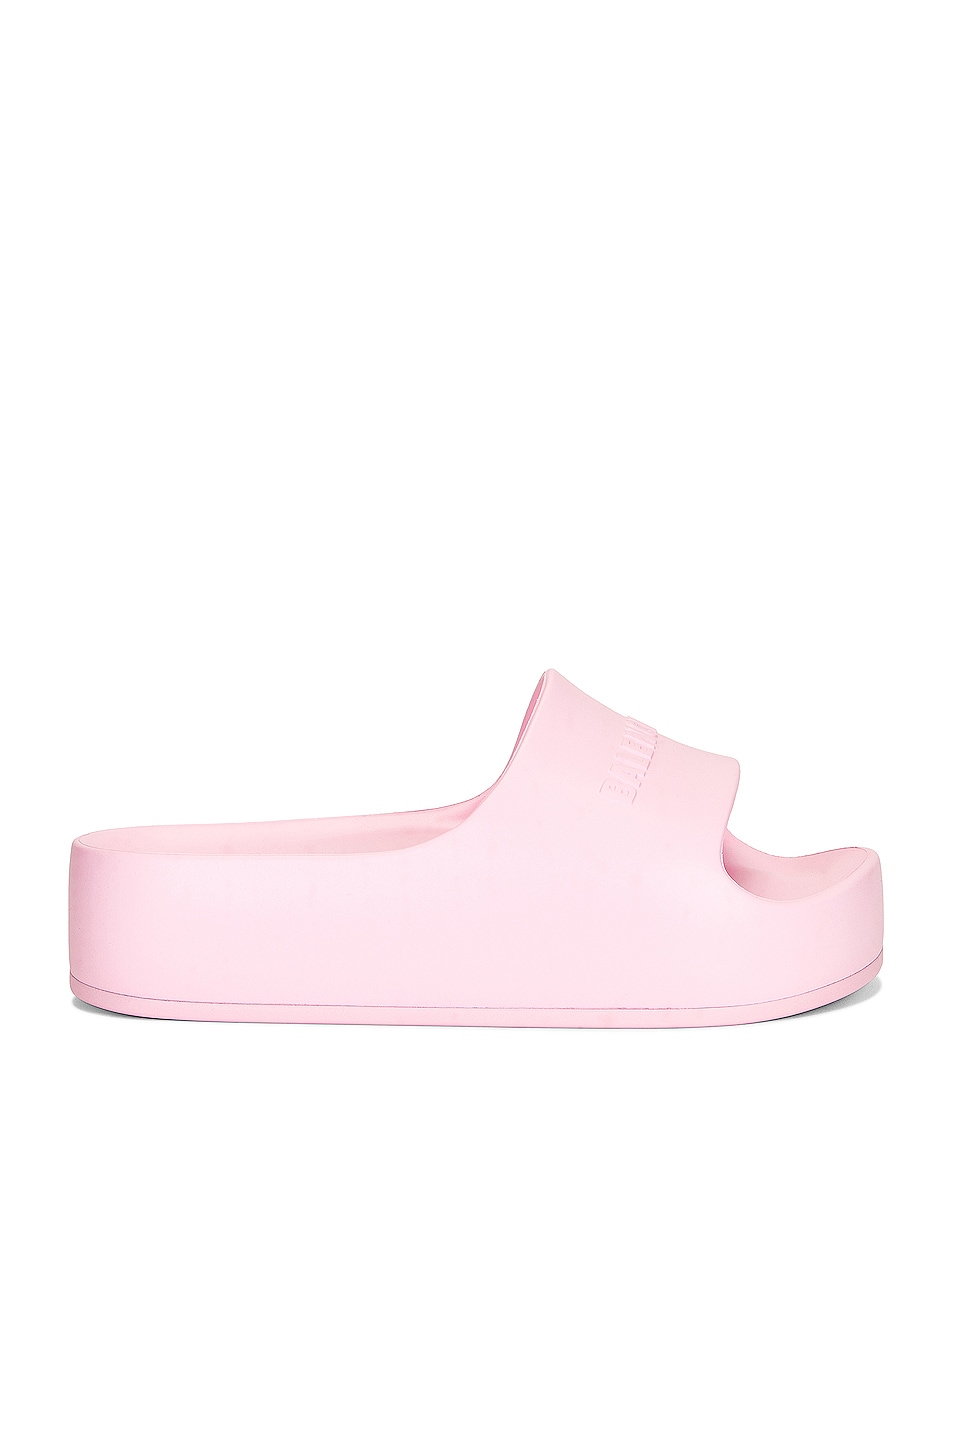 Image 1 of Balenciaga Chunky Slides in Light Pink & White